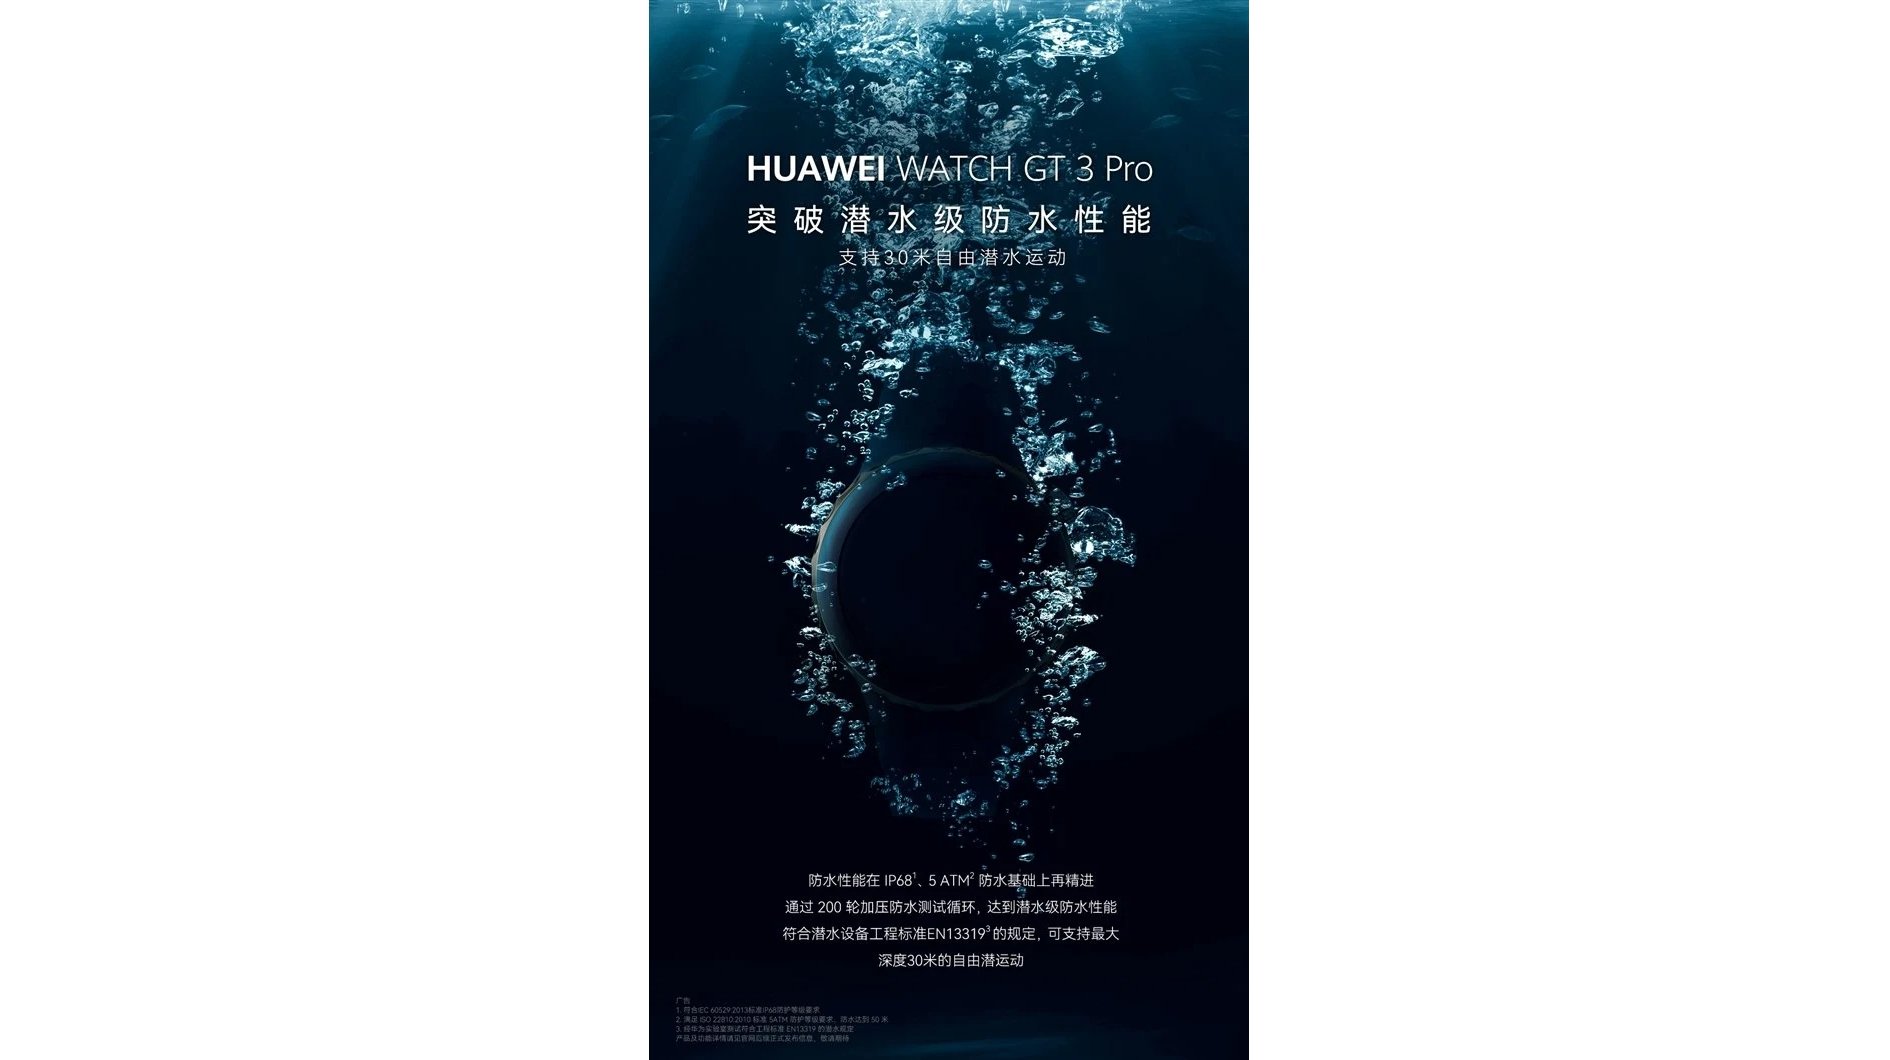 A teaser image that highlights the water resistance of the Huawei Watch GT 3 Pro